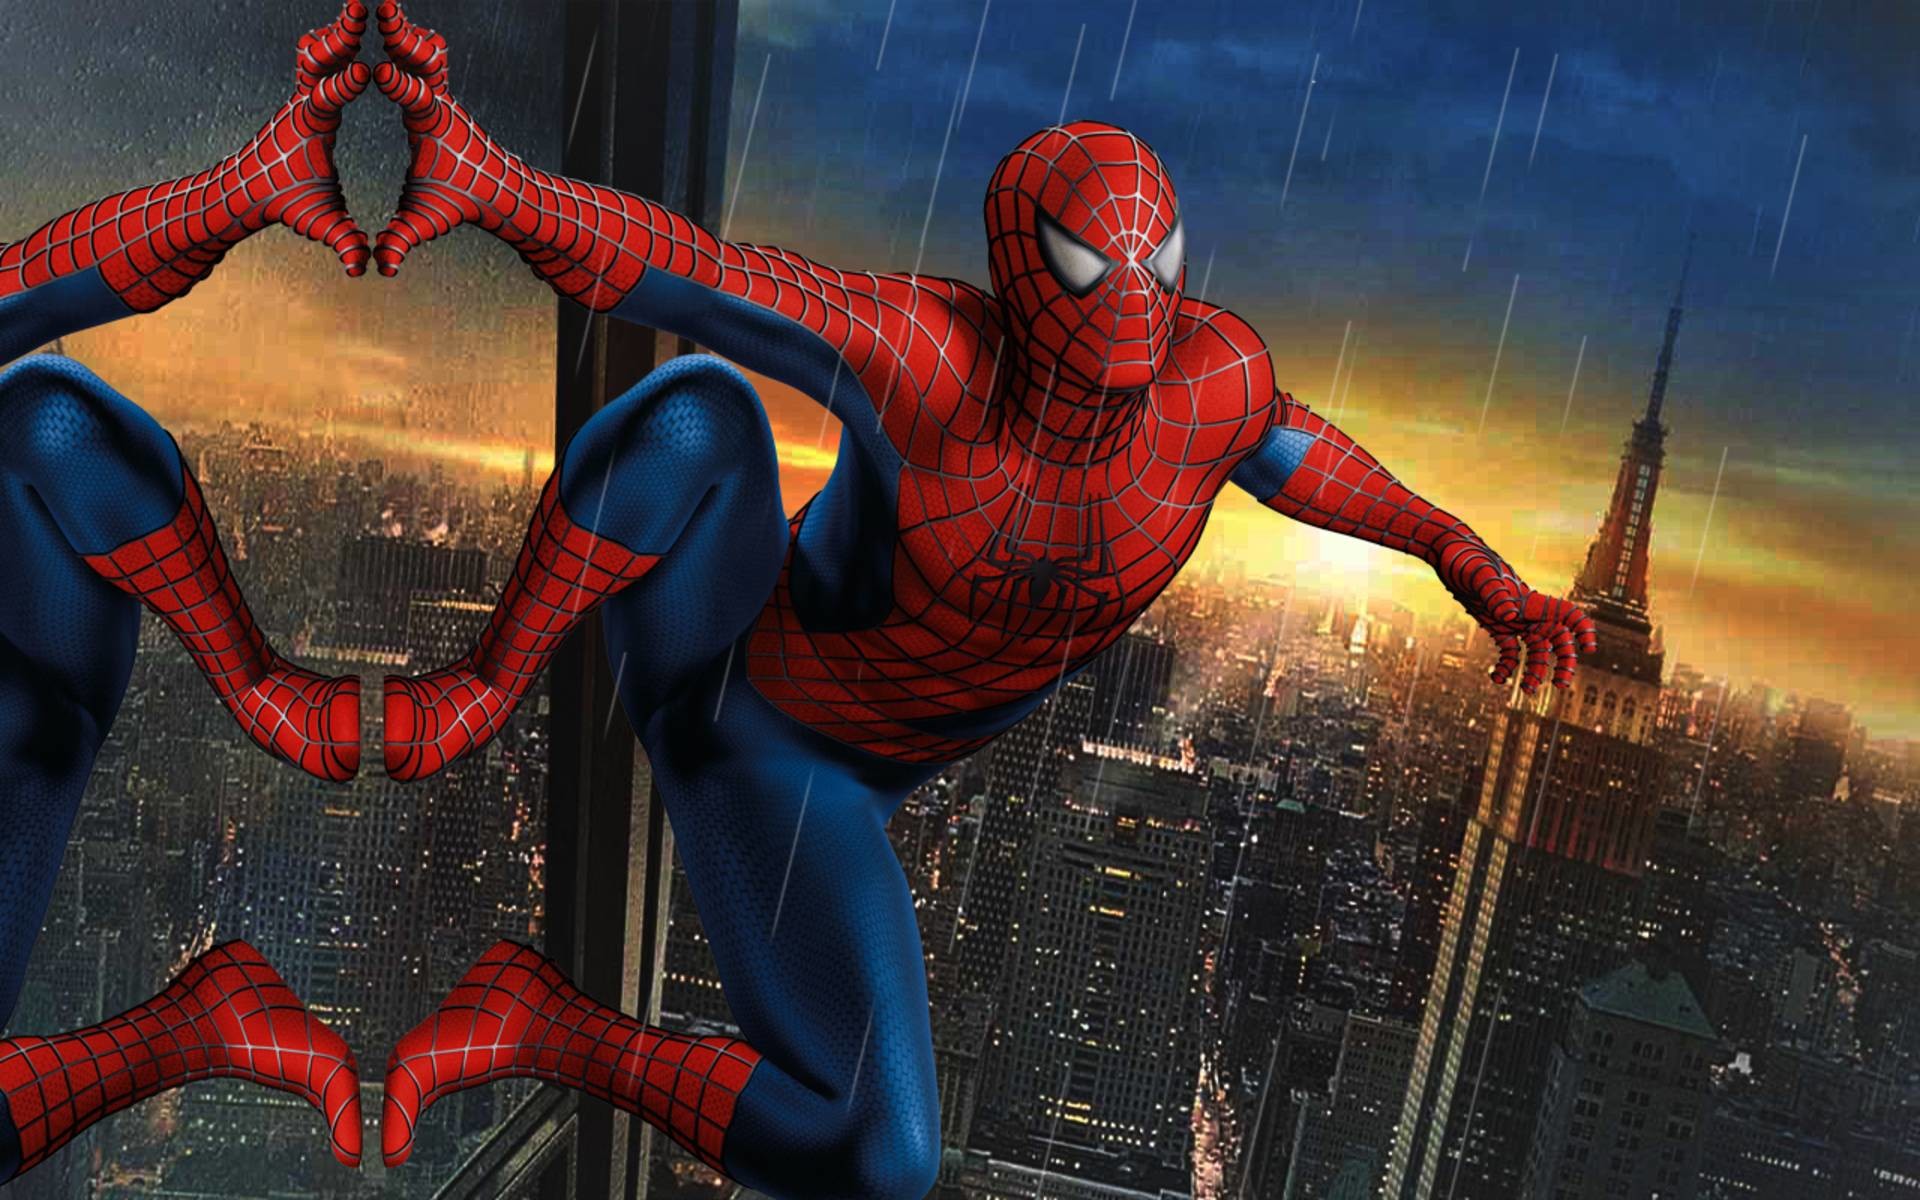 Download Spider Man 3 wallpapers for mobile phone free Spider Man 3 HD  pictures